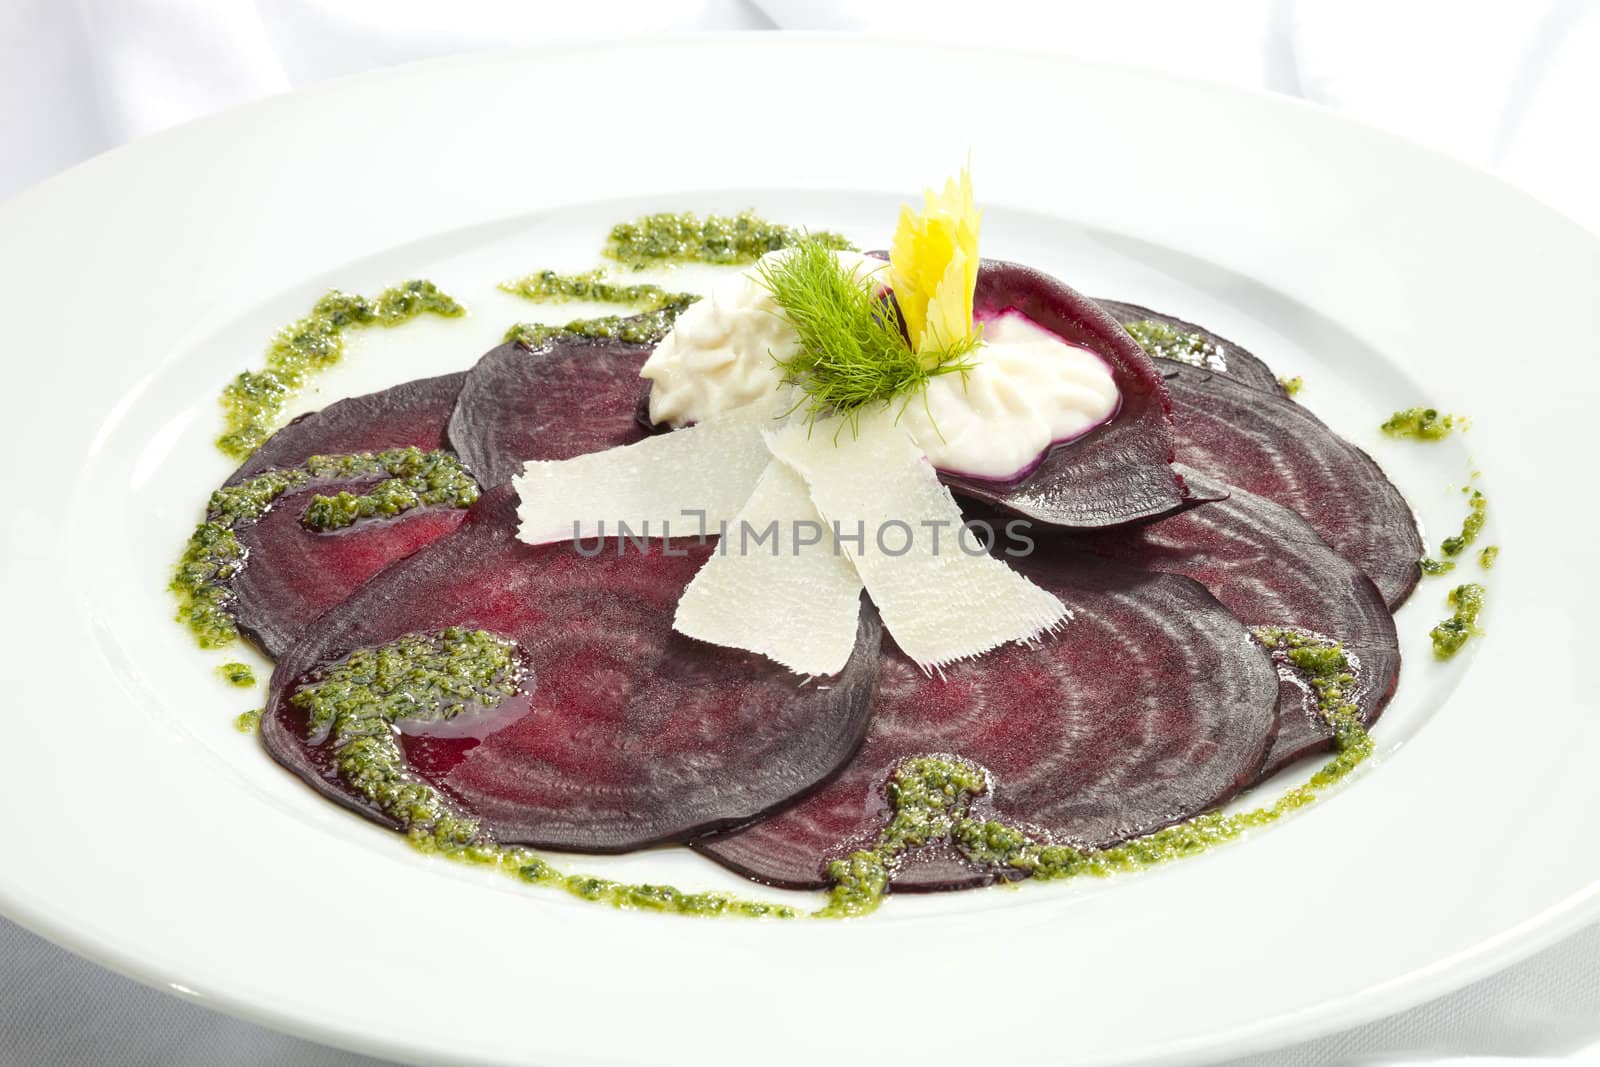 Vegetarian Beetroot Carpaccio w goat cheese and Pesto by hanusst